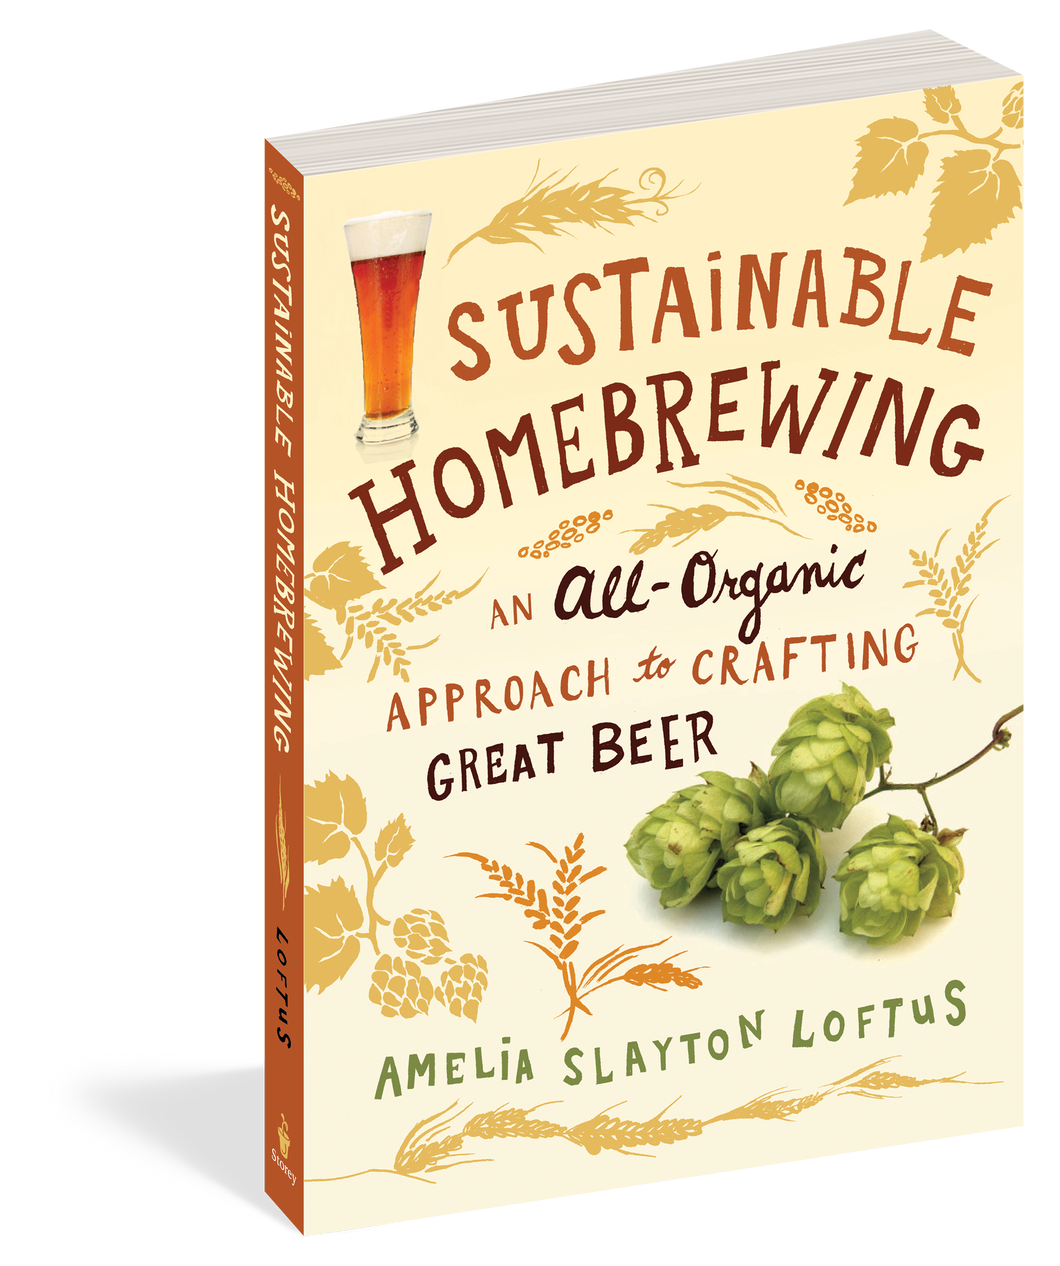 Sustainable Homebrewing